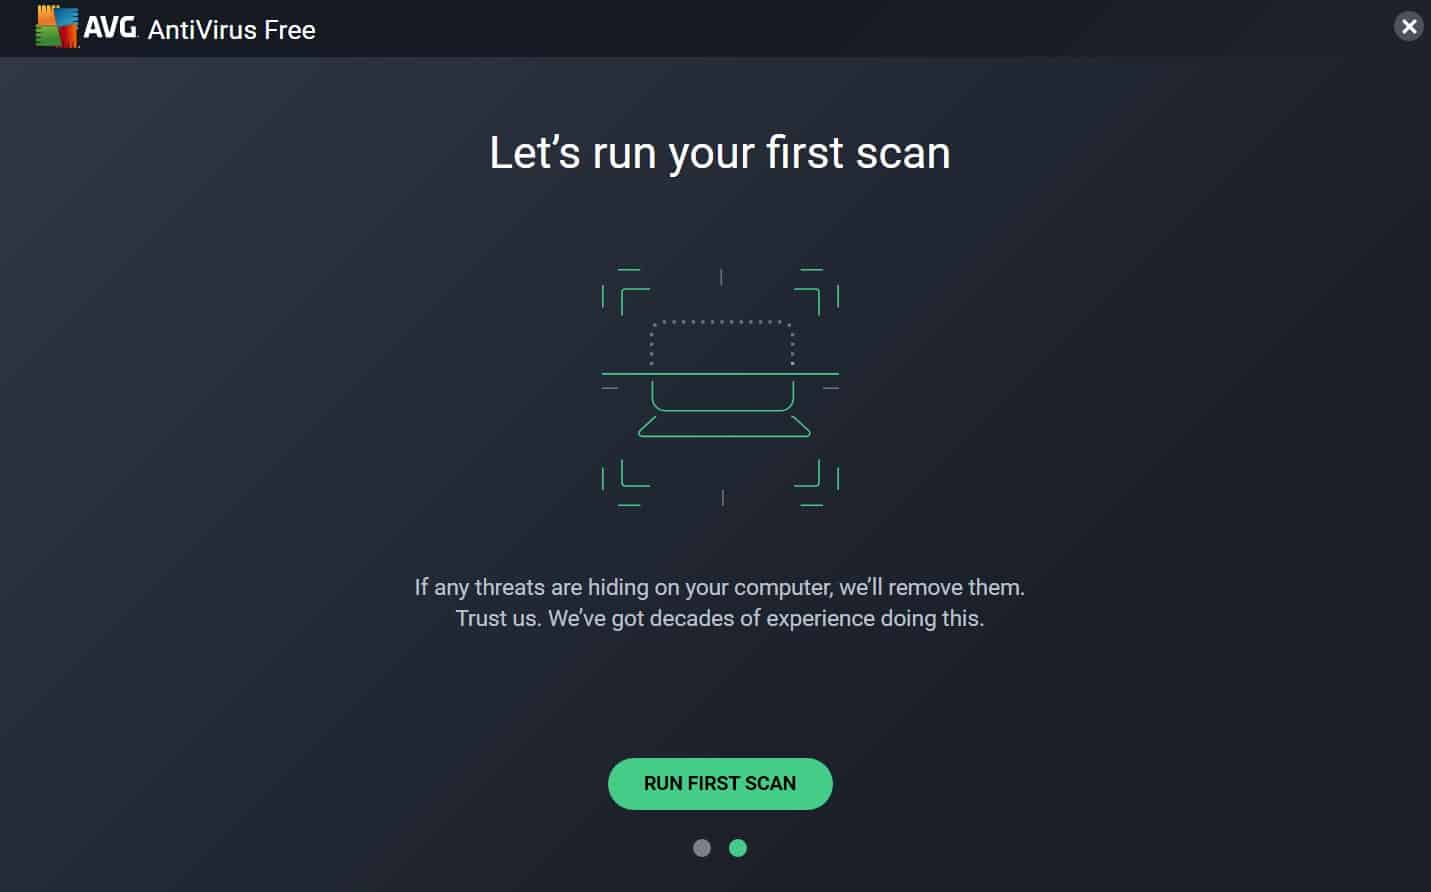 Open the antivirus software
Select "Scan now"